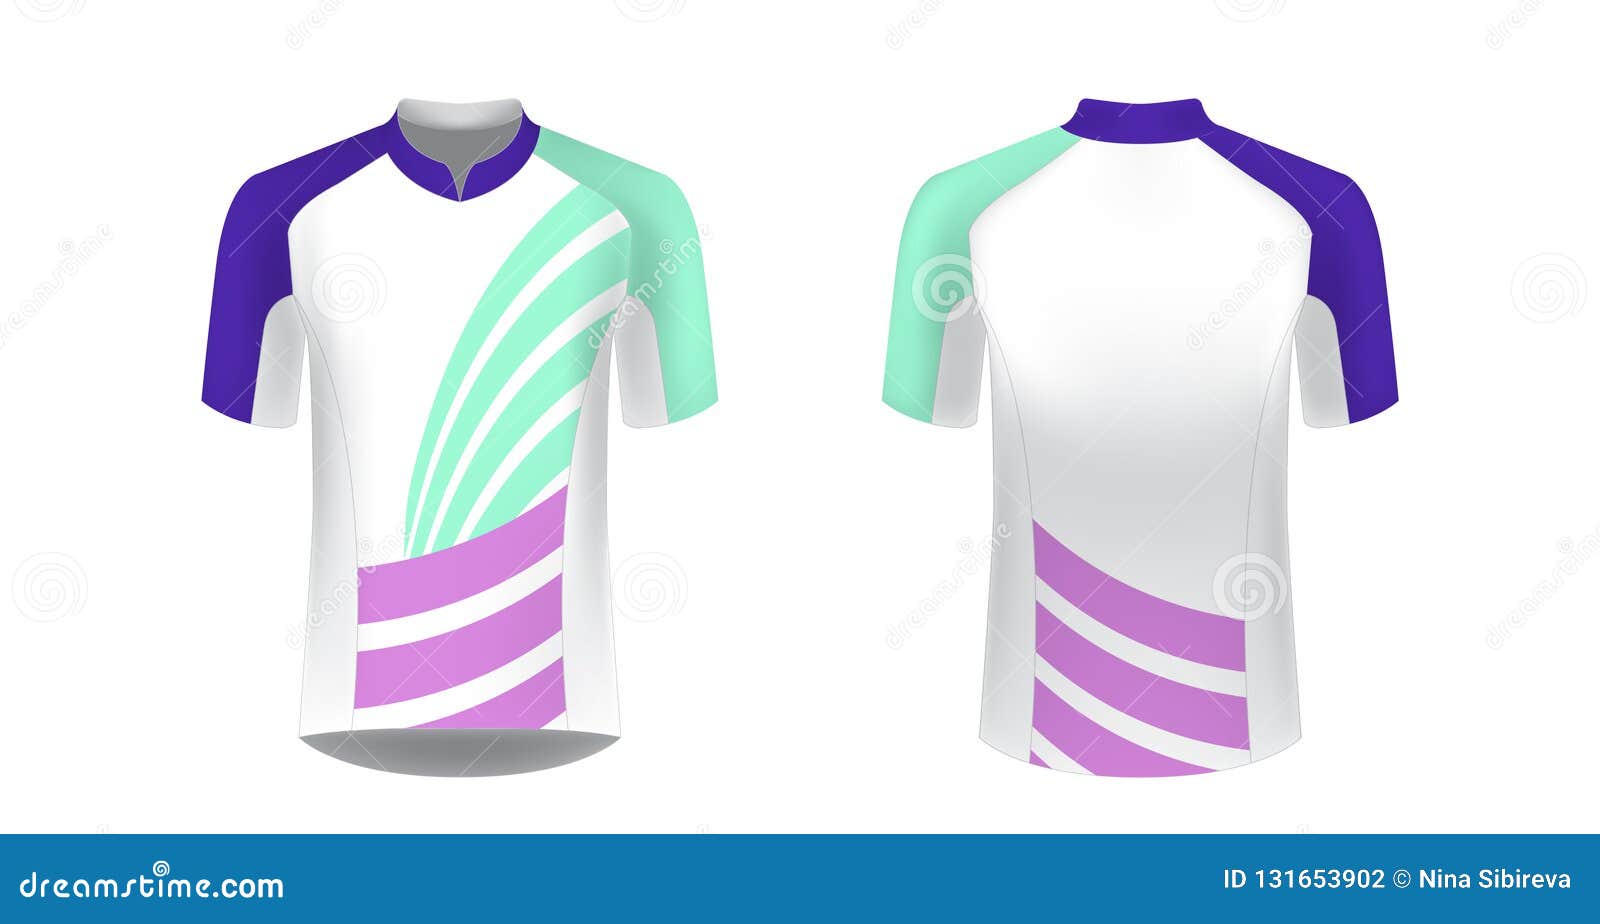 Download Cycling Jersey Vector Mockup T Shirt Sport Design Template Sublimation Printing For Sportswear Apparel Blank For Triathlon Stock Illustration Illustration Of Back Safety 131653902